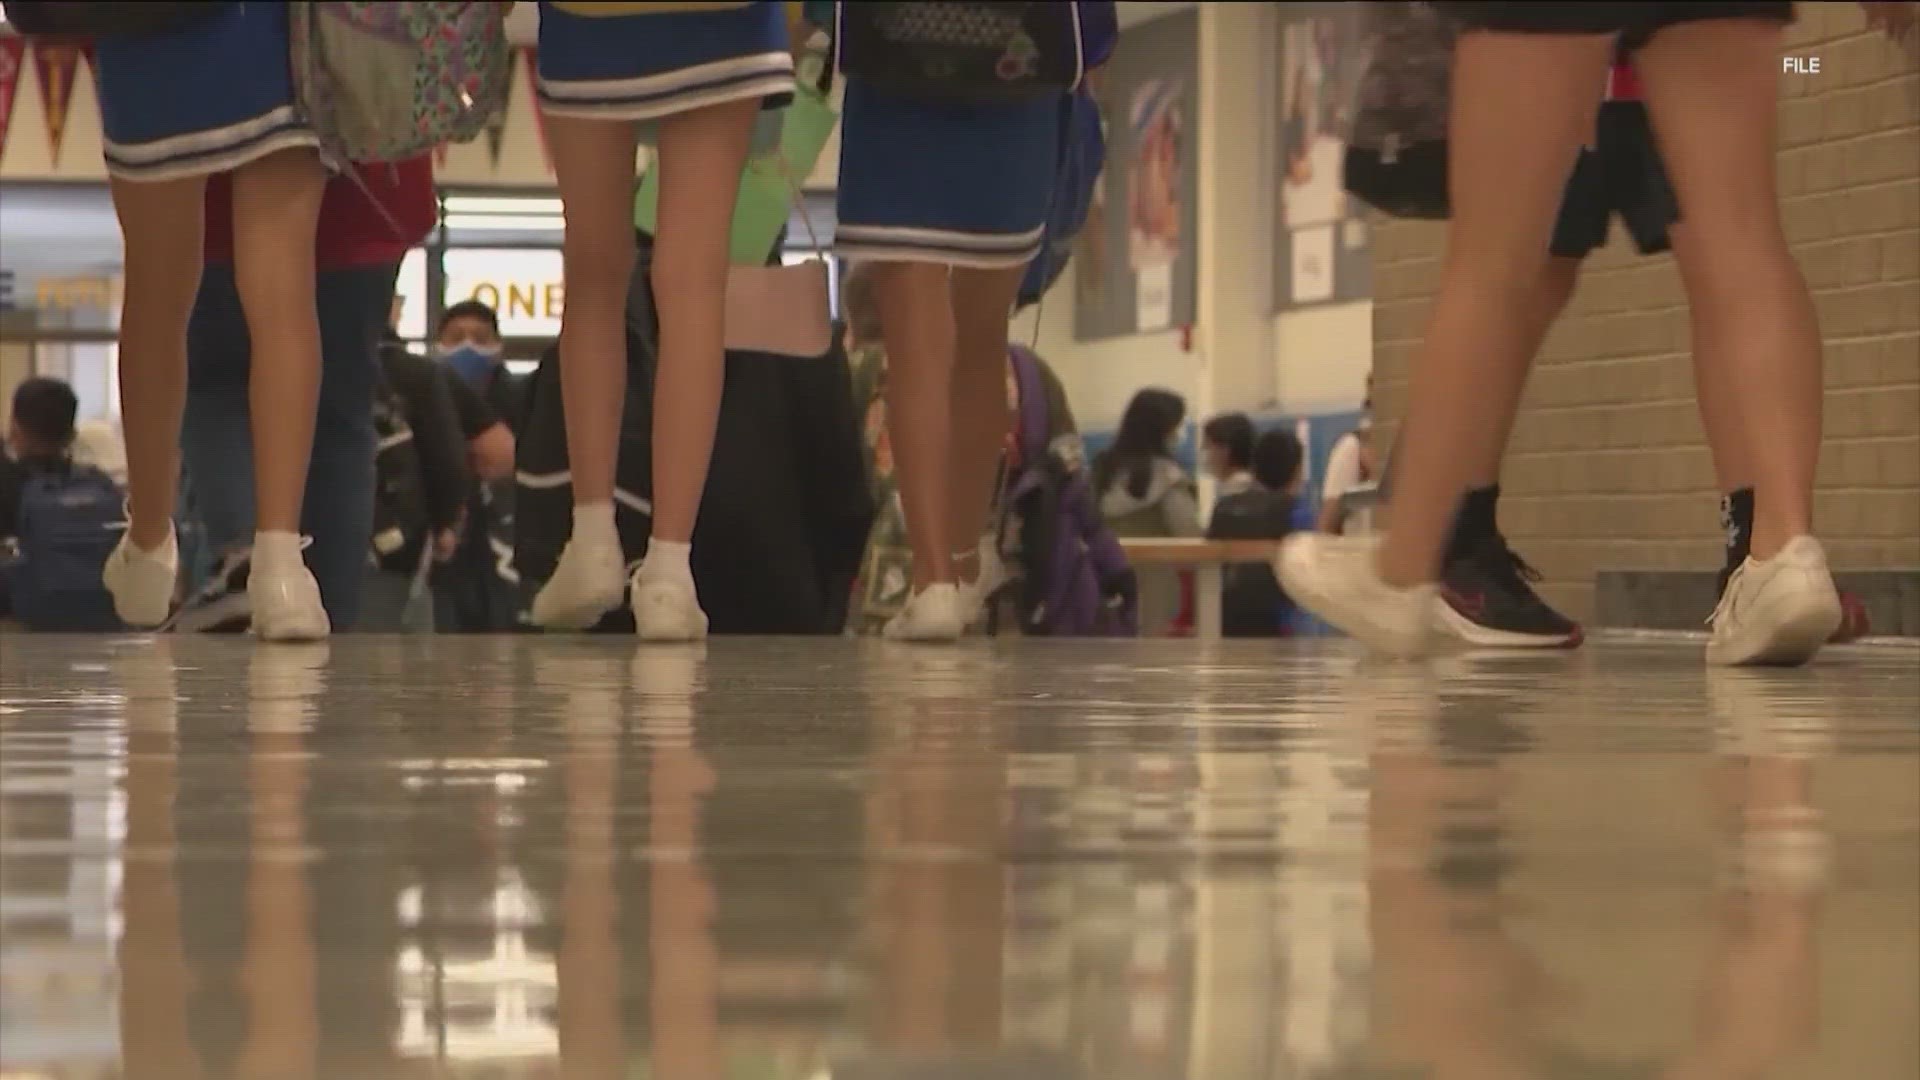 A new report by the ACLU of Texas found about half of kindergarten through 12th grade school districts have discriminatory dress codes and grooming policies.